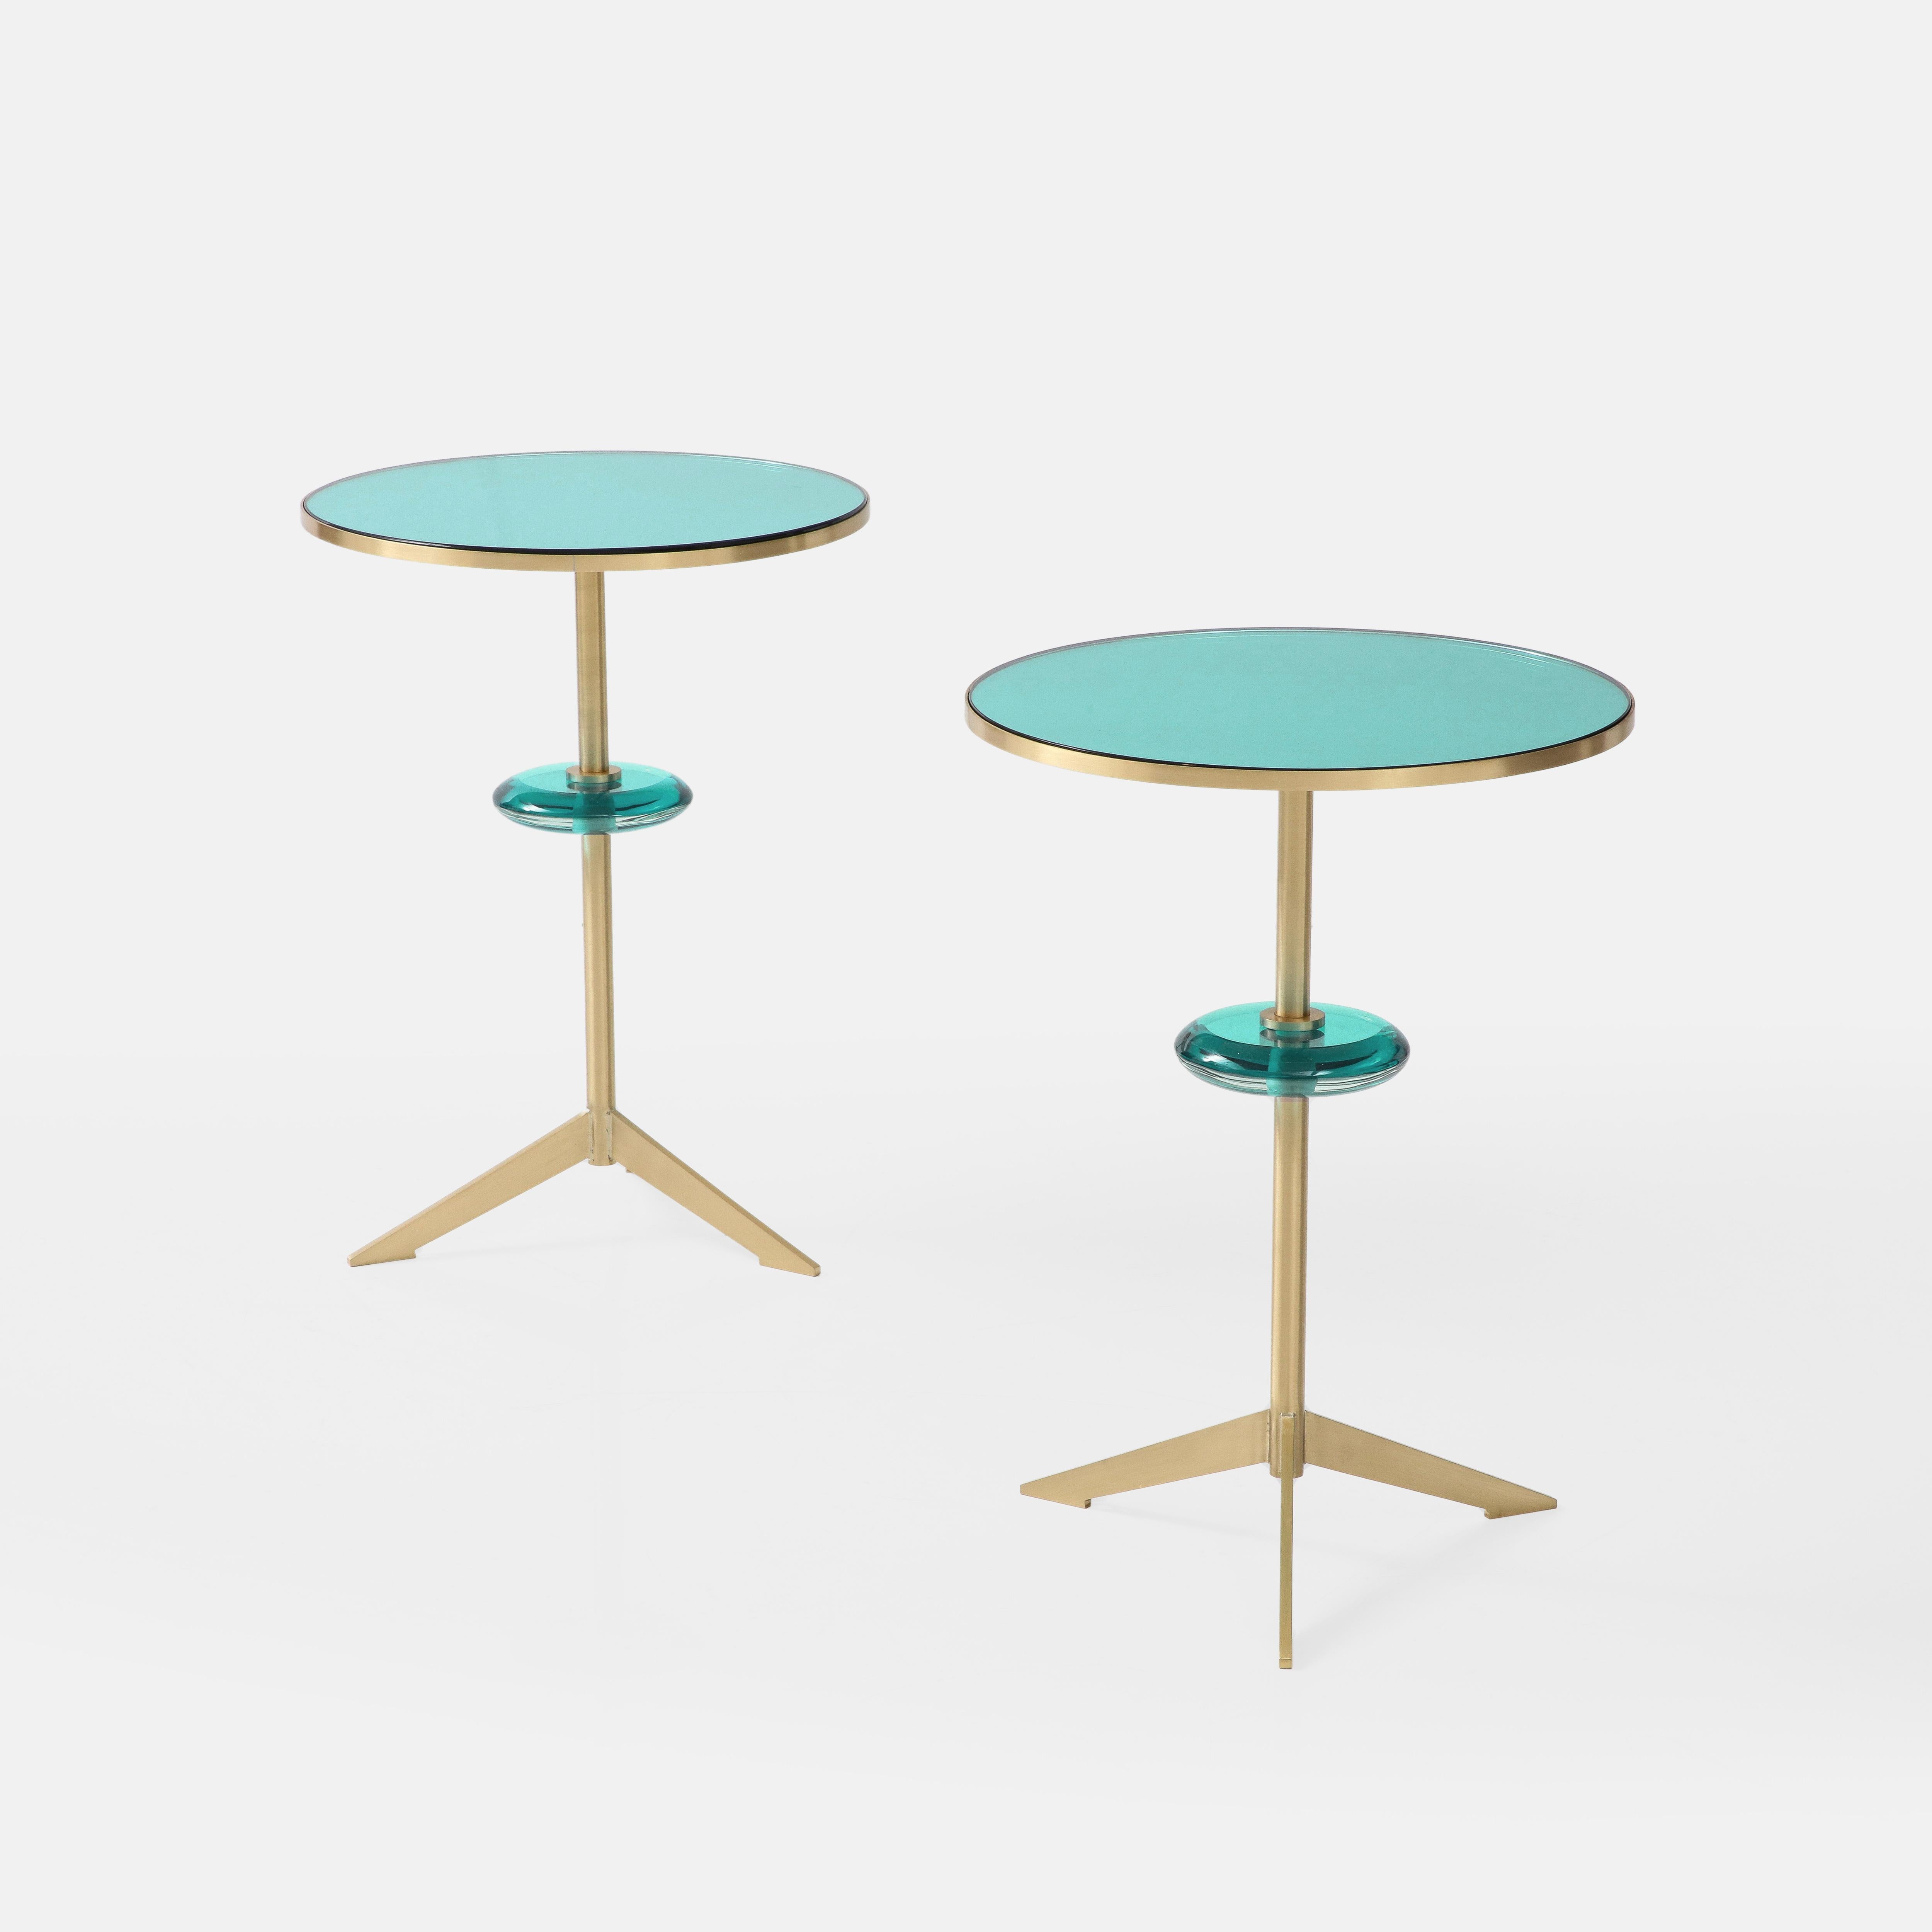 Effetto Vetro exquisite custom contemporary pair of round side tables with green glass mirrored tops inset on satin brass tripod bases with floating green glass orbs suspended on brass stems. This exquisite pair of modernist sculptural side tables